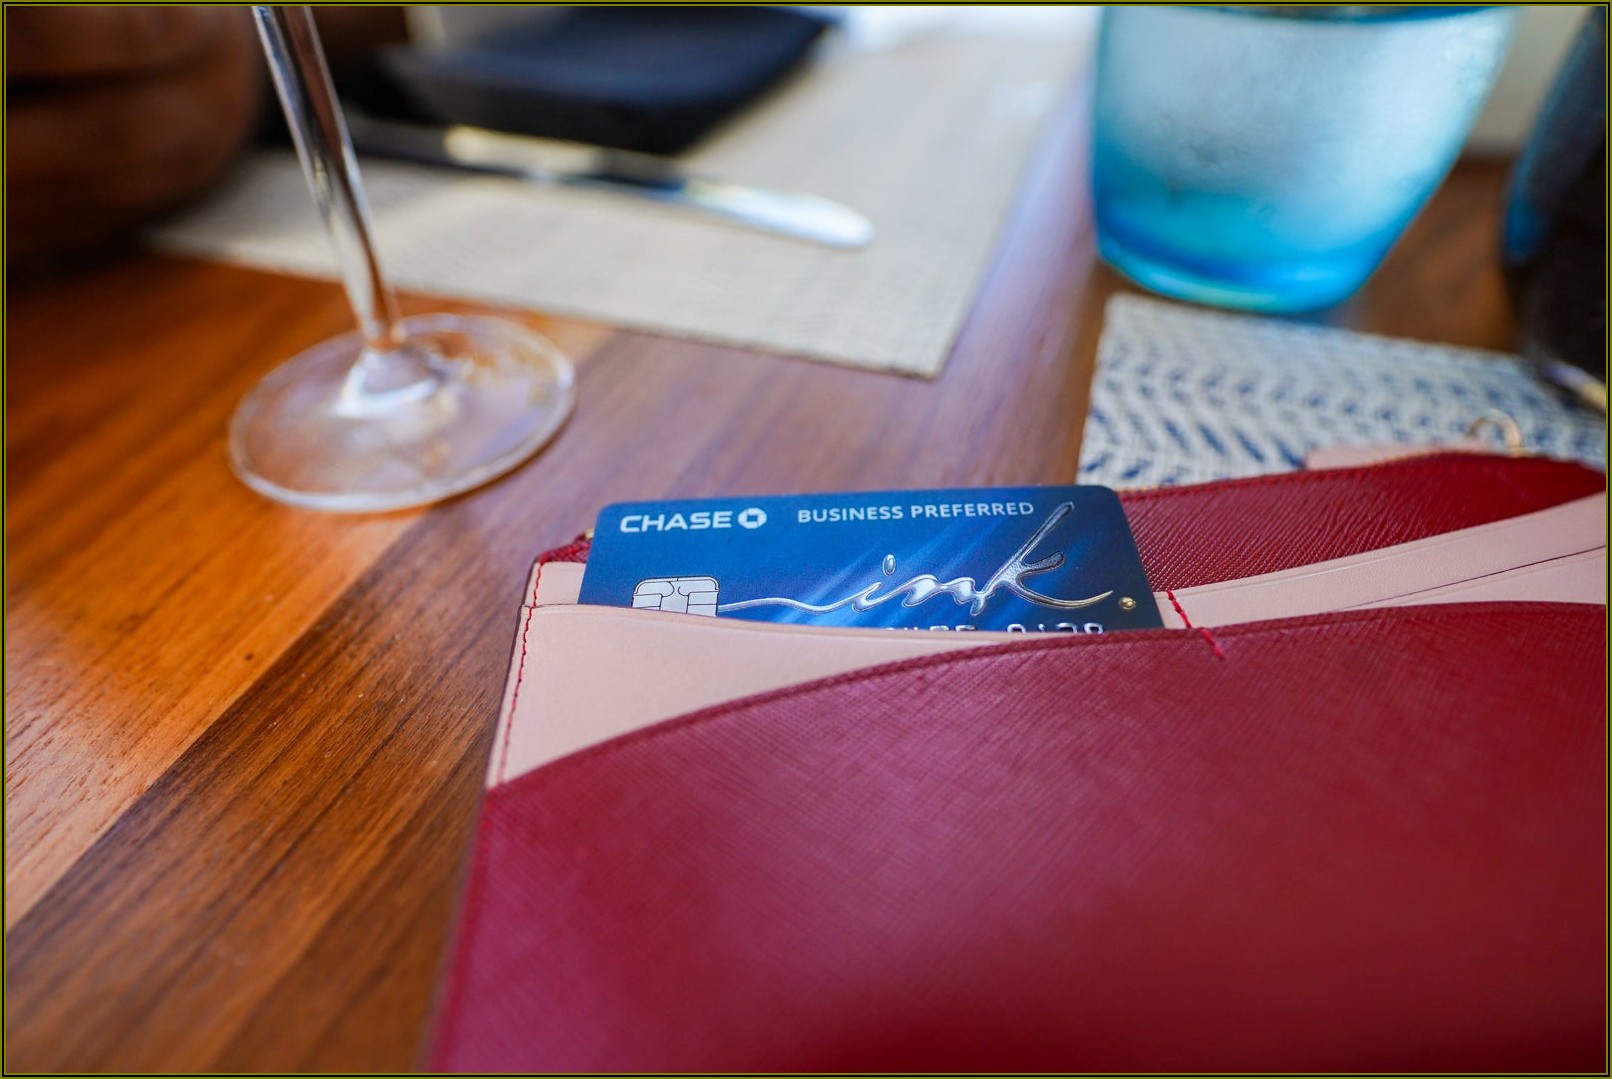 Delta Business Card Amex